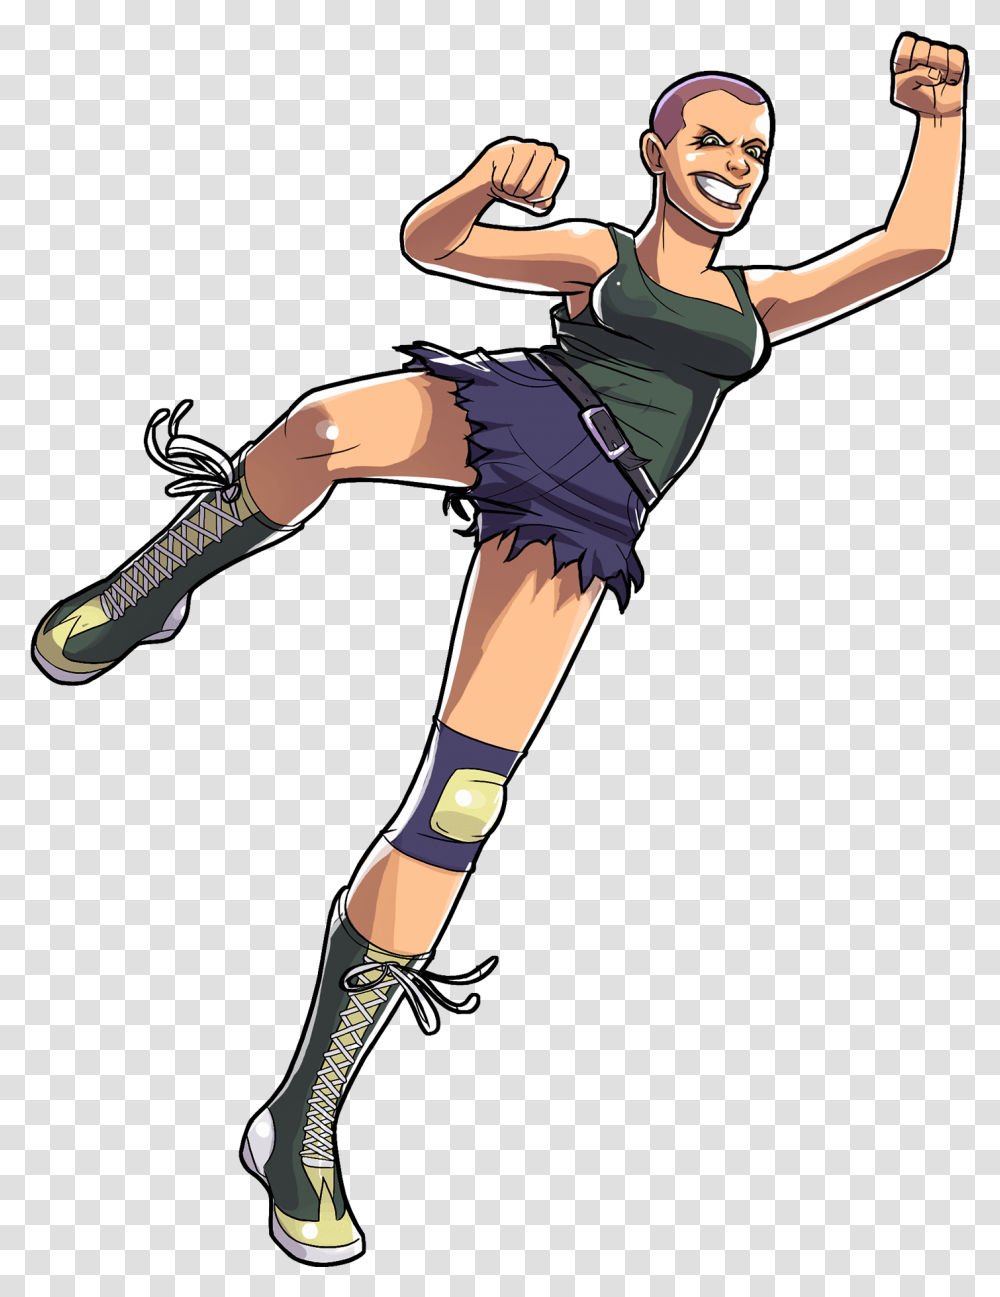 The Muscle Hustle Wikia Cartoon, Person, Leisure Activities, Dance Pose Transparent Png